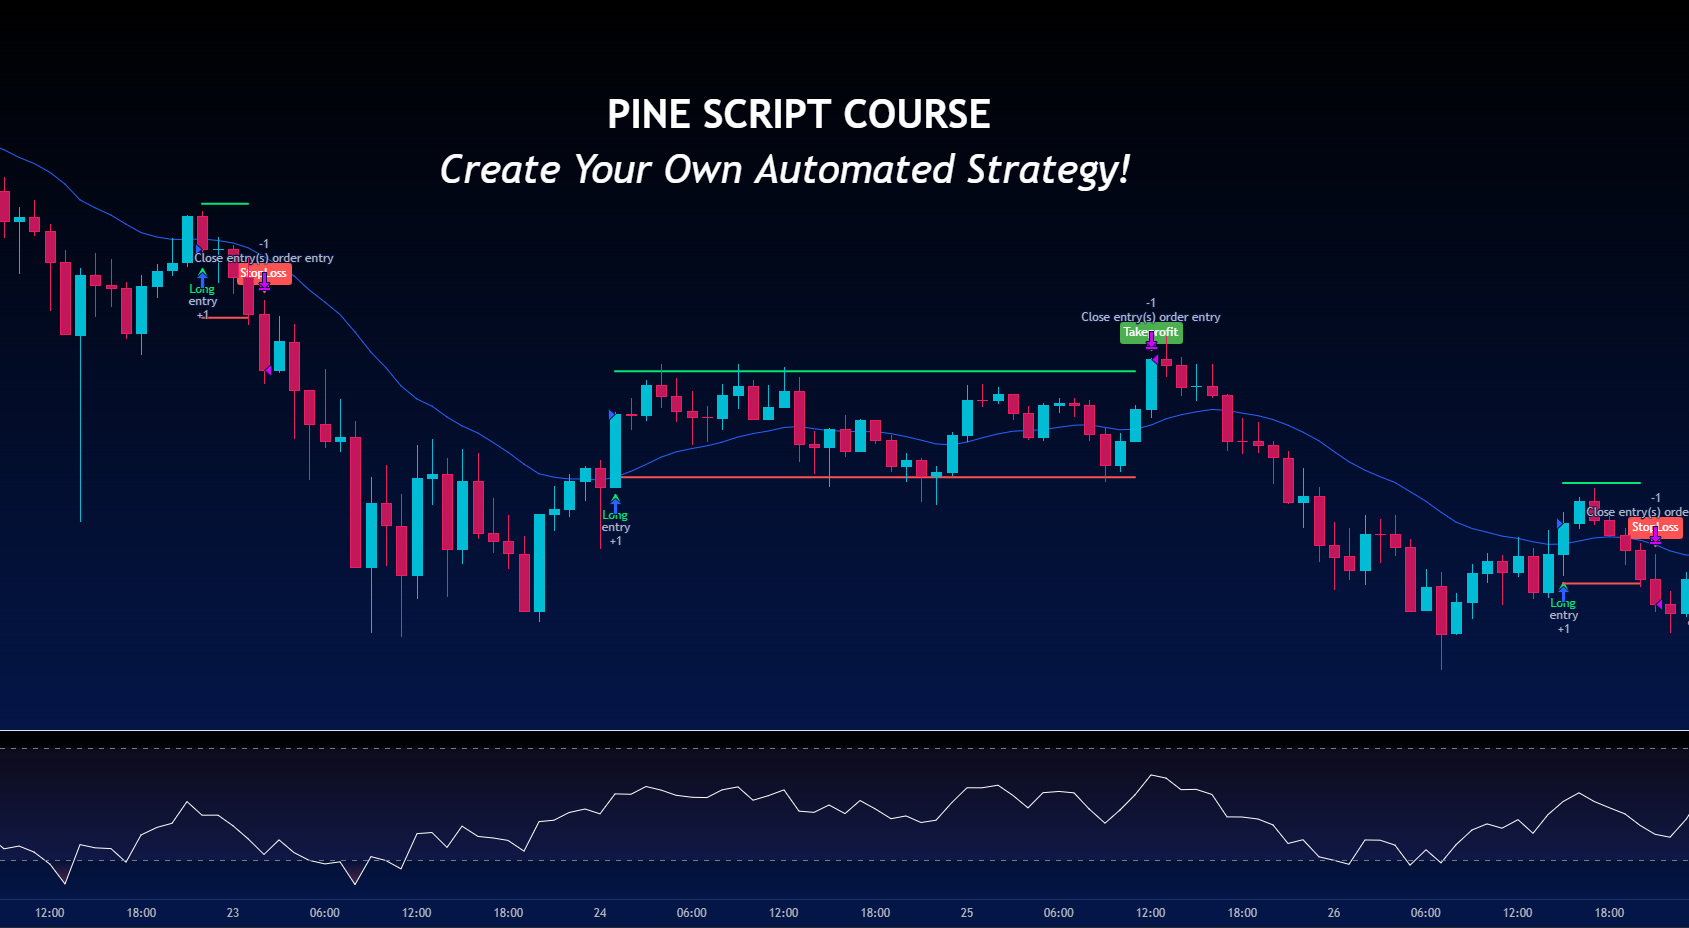 PINE SCRIPT COURSE - Create your own automated strategy